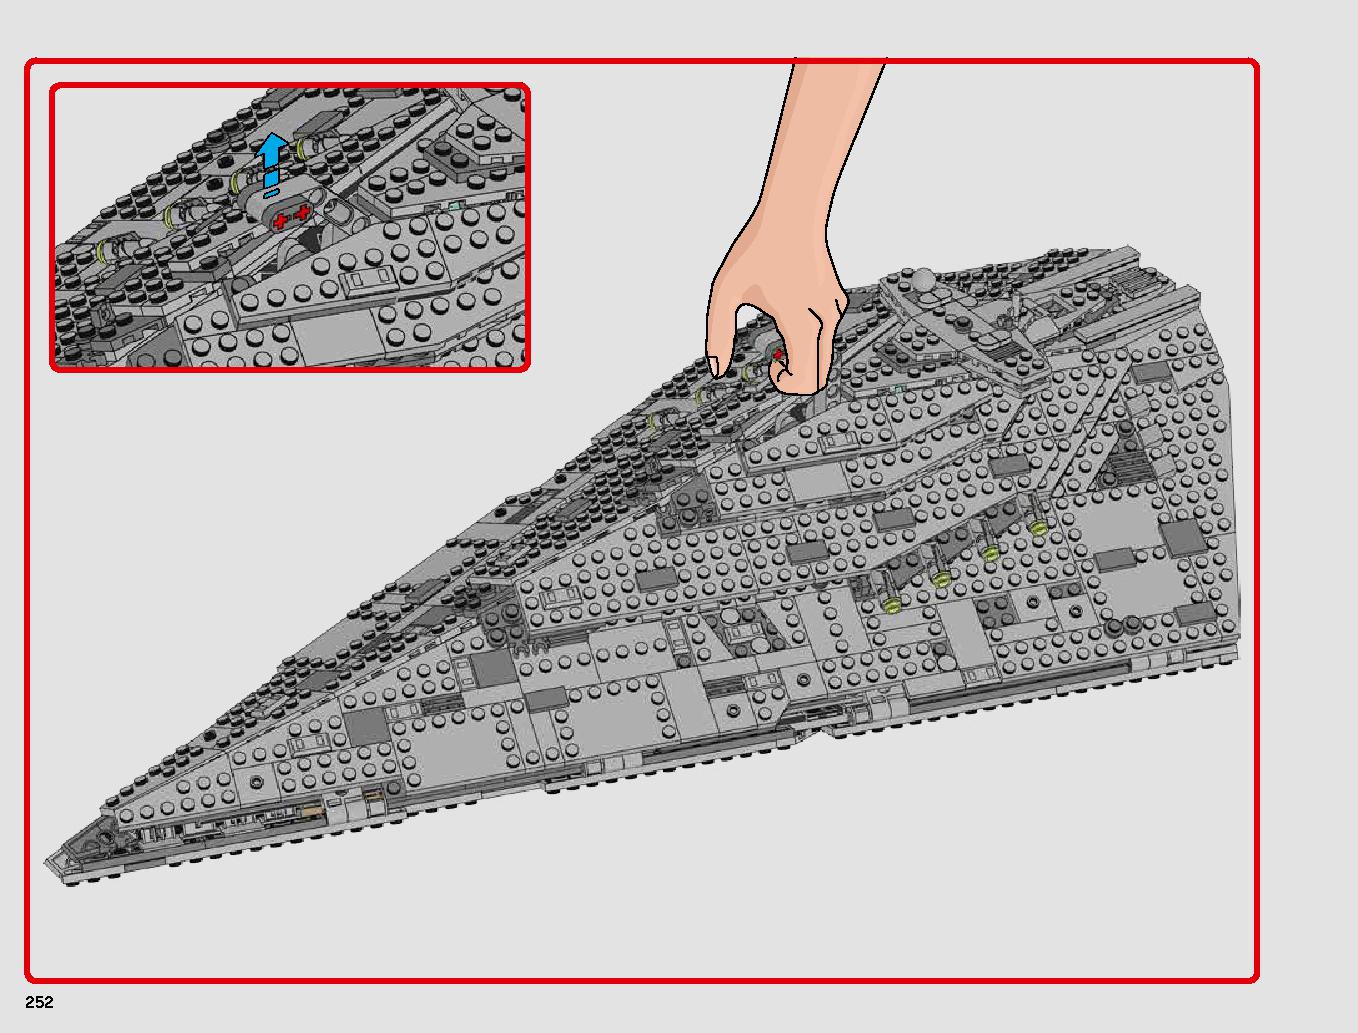 First Order Star Destroyer 75190 レゴの商品情報 レゴの説明書・組立方法 252 page